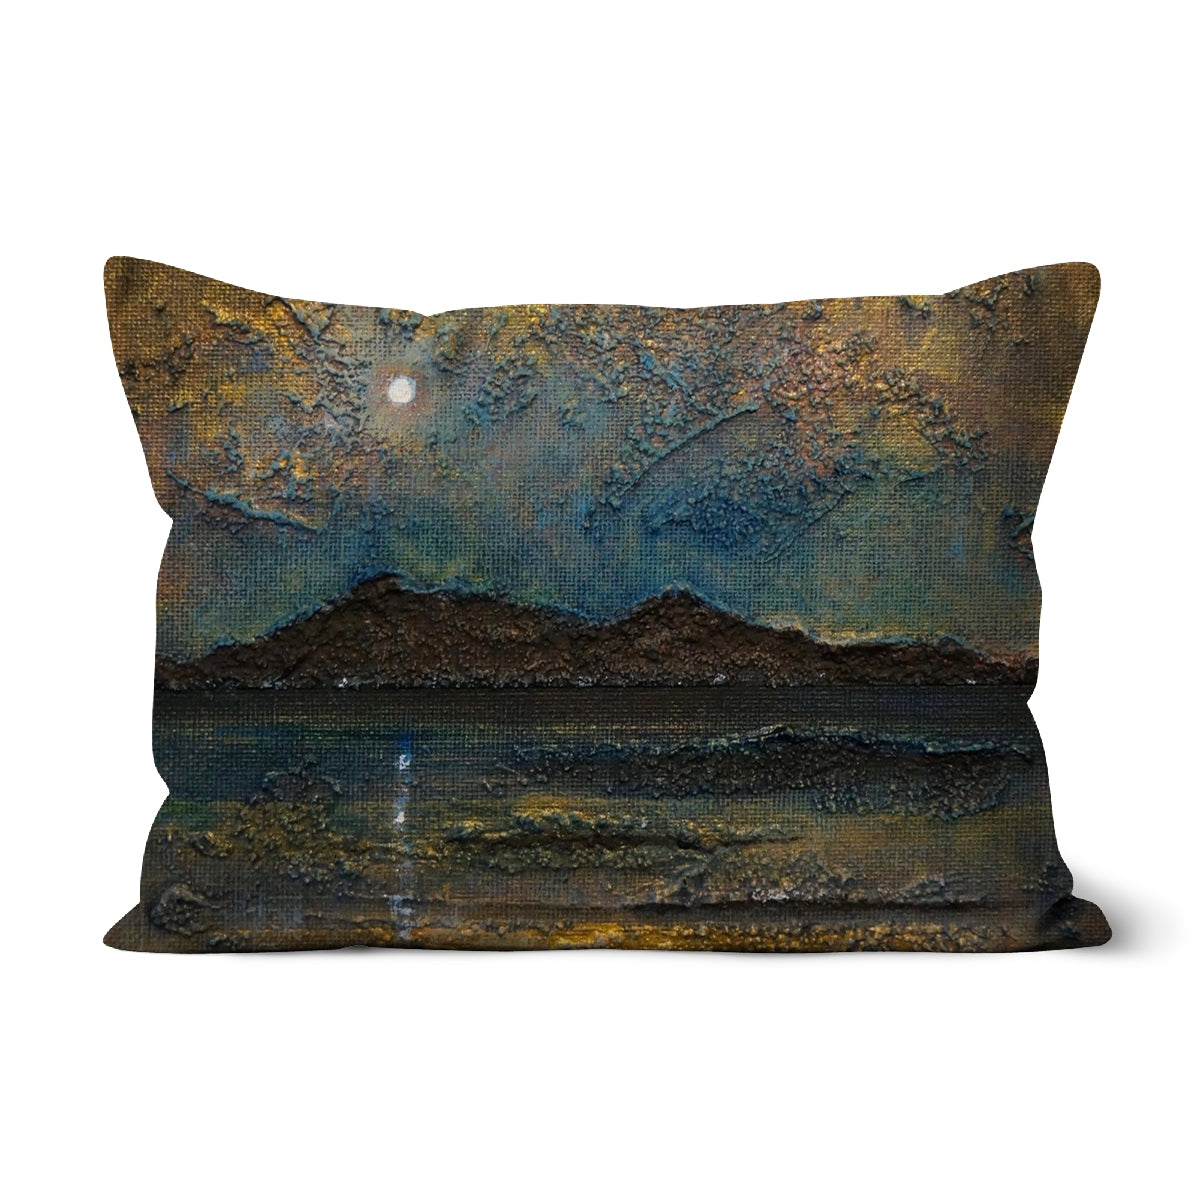 Arran Moonlight Art Gifts Cushion-Cushions-Arran Art Gallery-Faux Suede-19"x13"-Paintings, Prints, Homeware, Art Gifts From Scotland By Scottish Artist Kevin Hunter